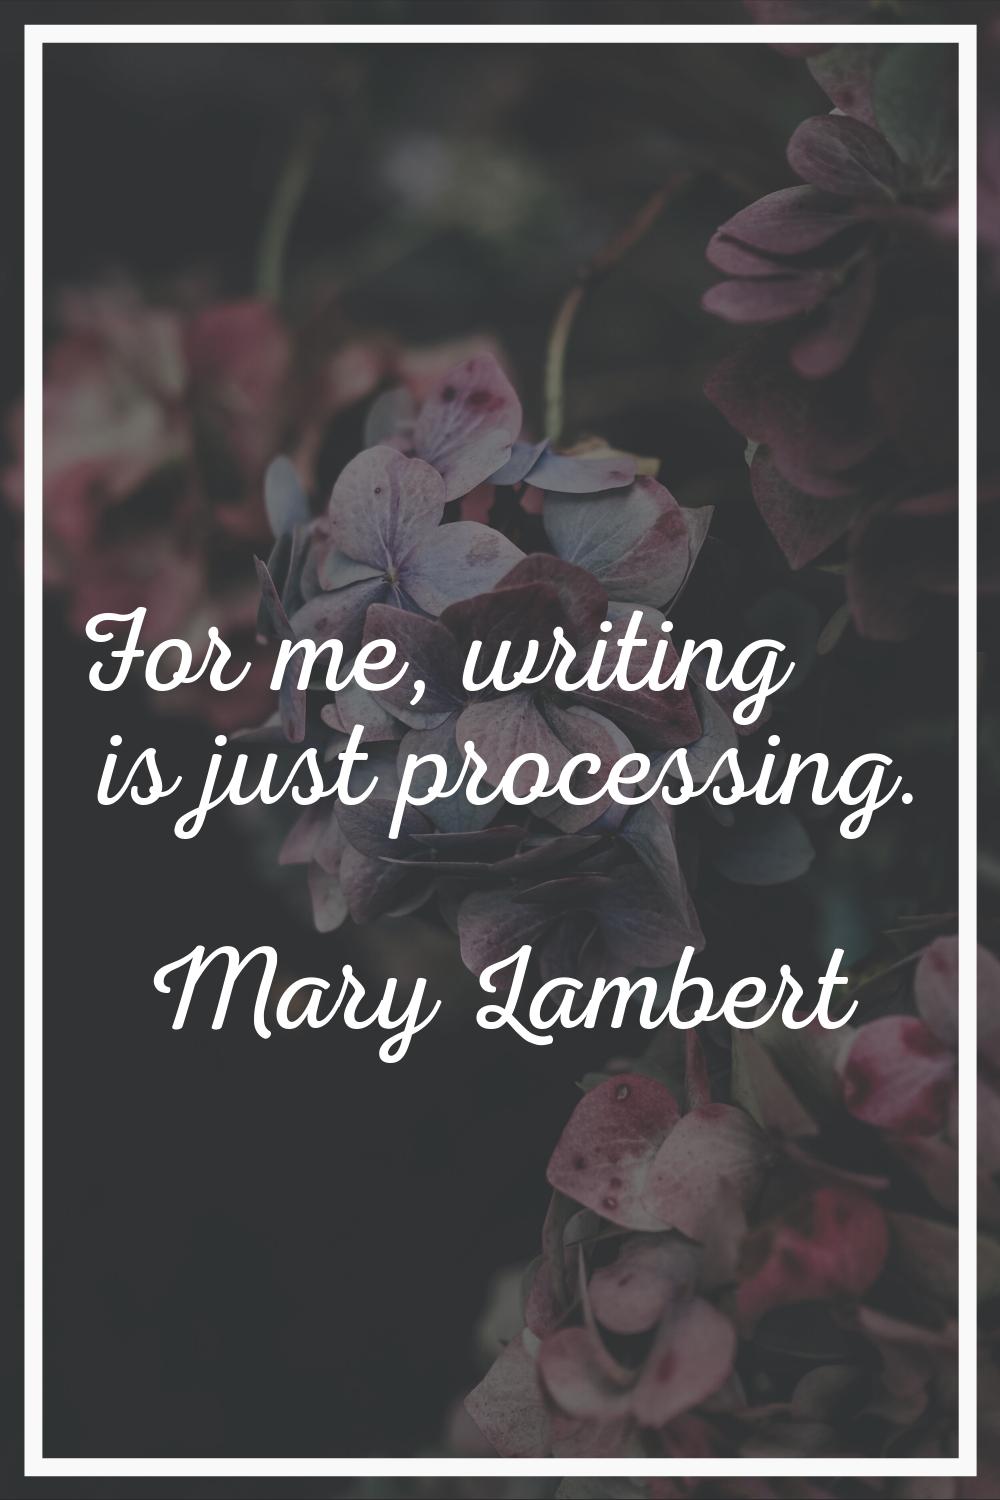 For me, writing is just processing.